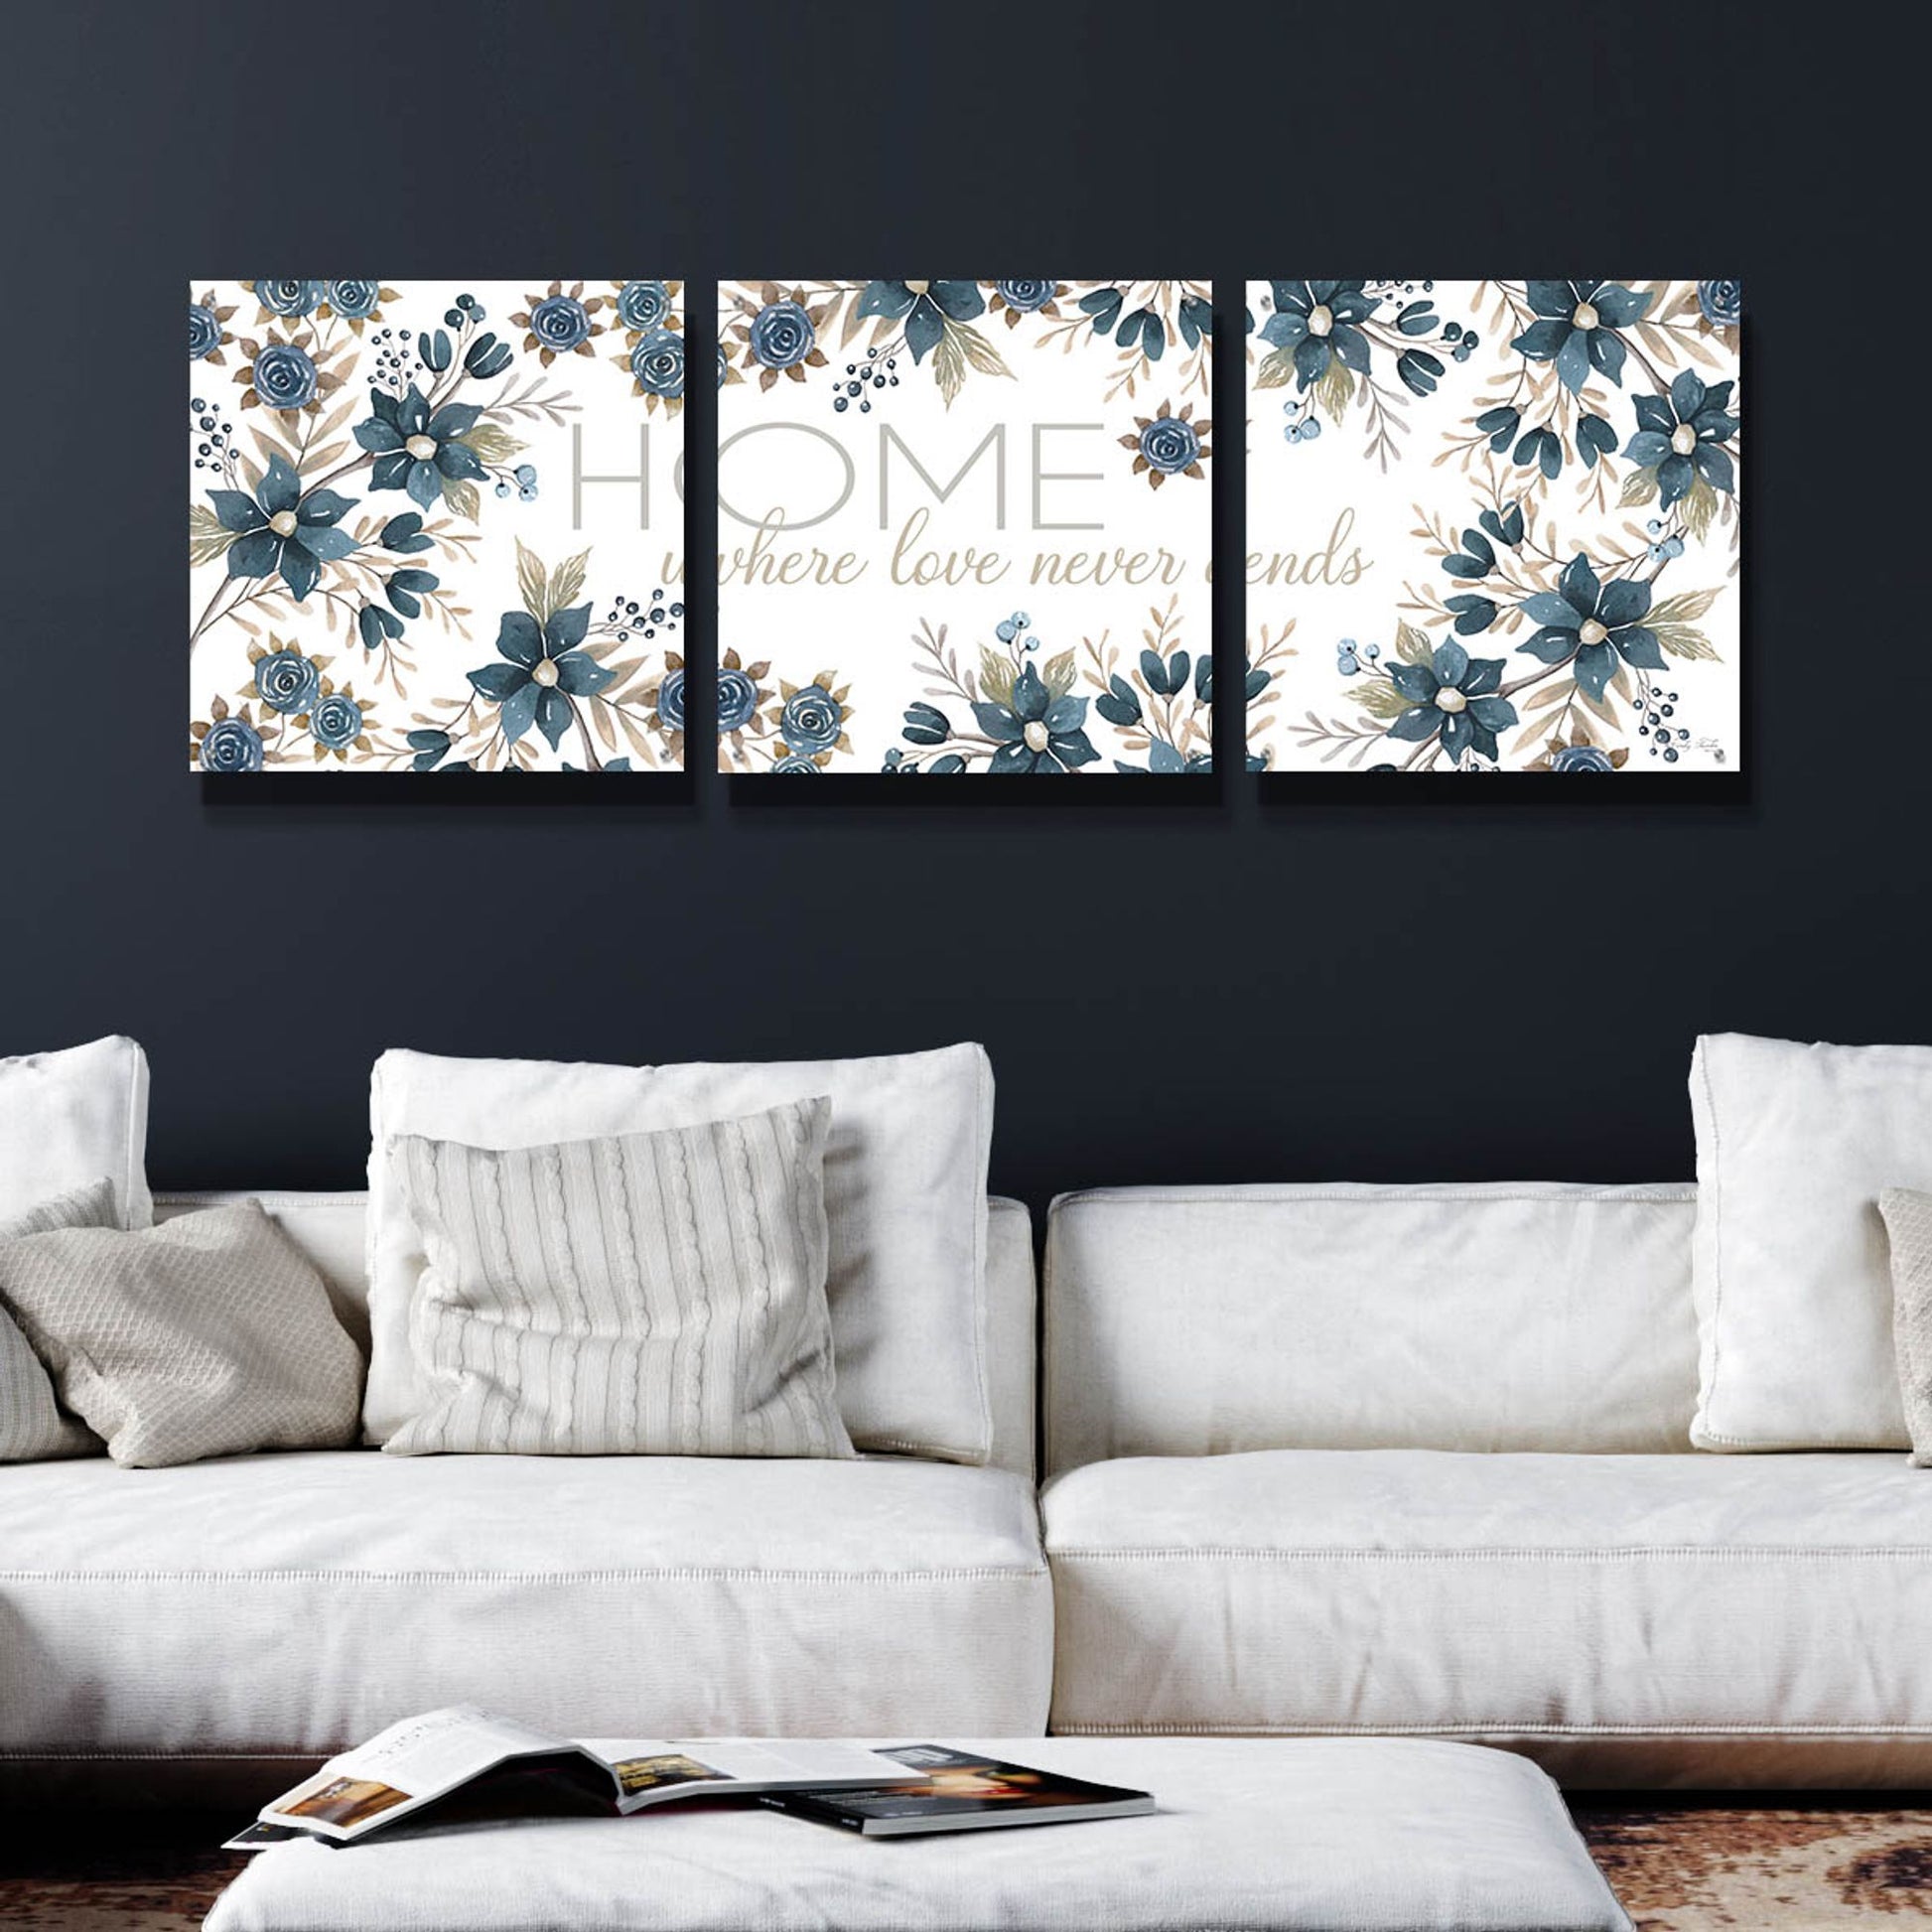 Epic Art 'HOME - Where Love Never Ends' by Cindy Jacobs, Acrylic Glass Wall Art, 3 Piece Set,72x24